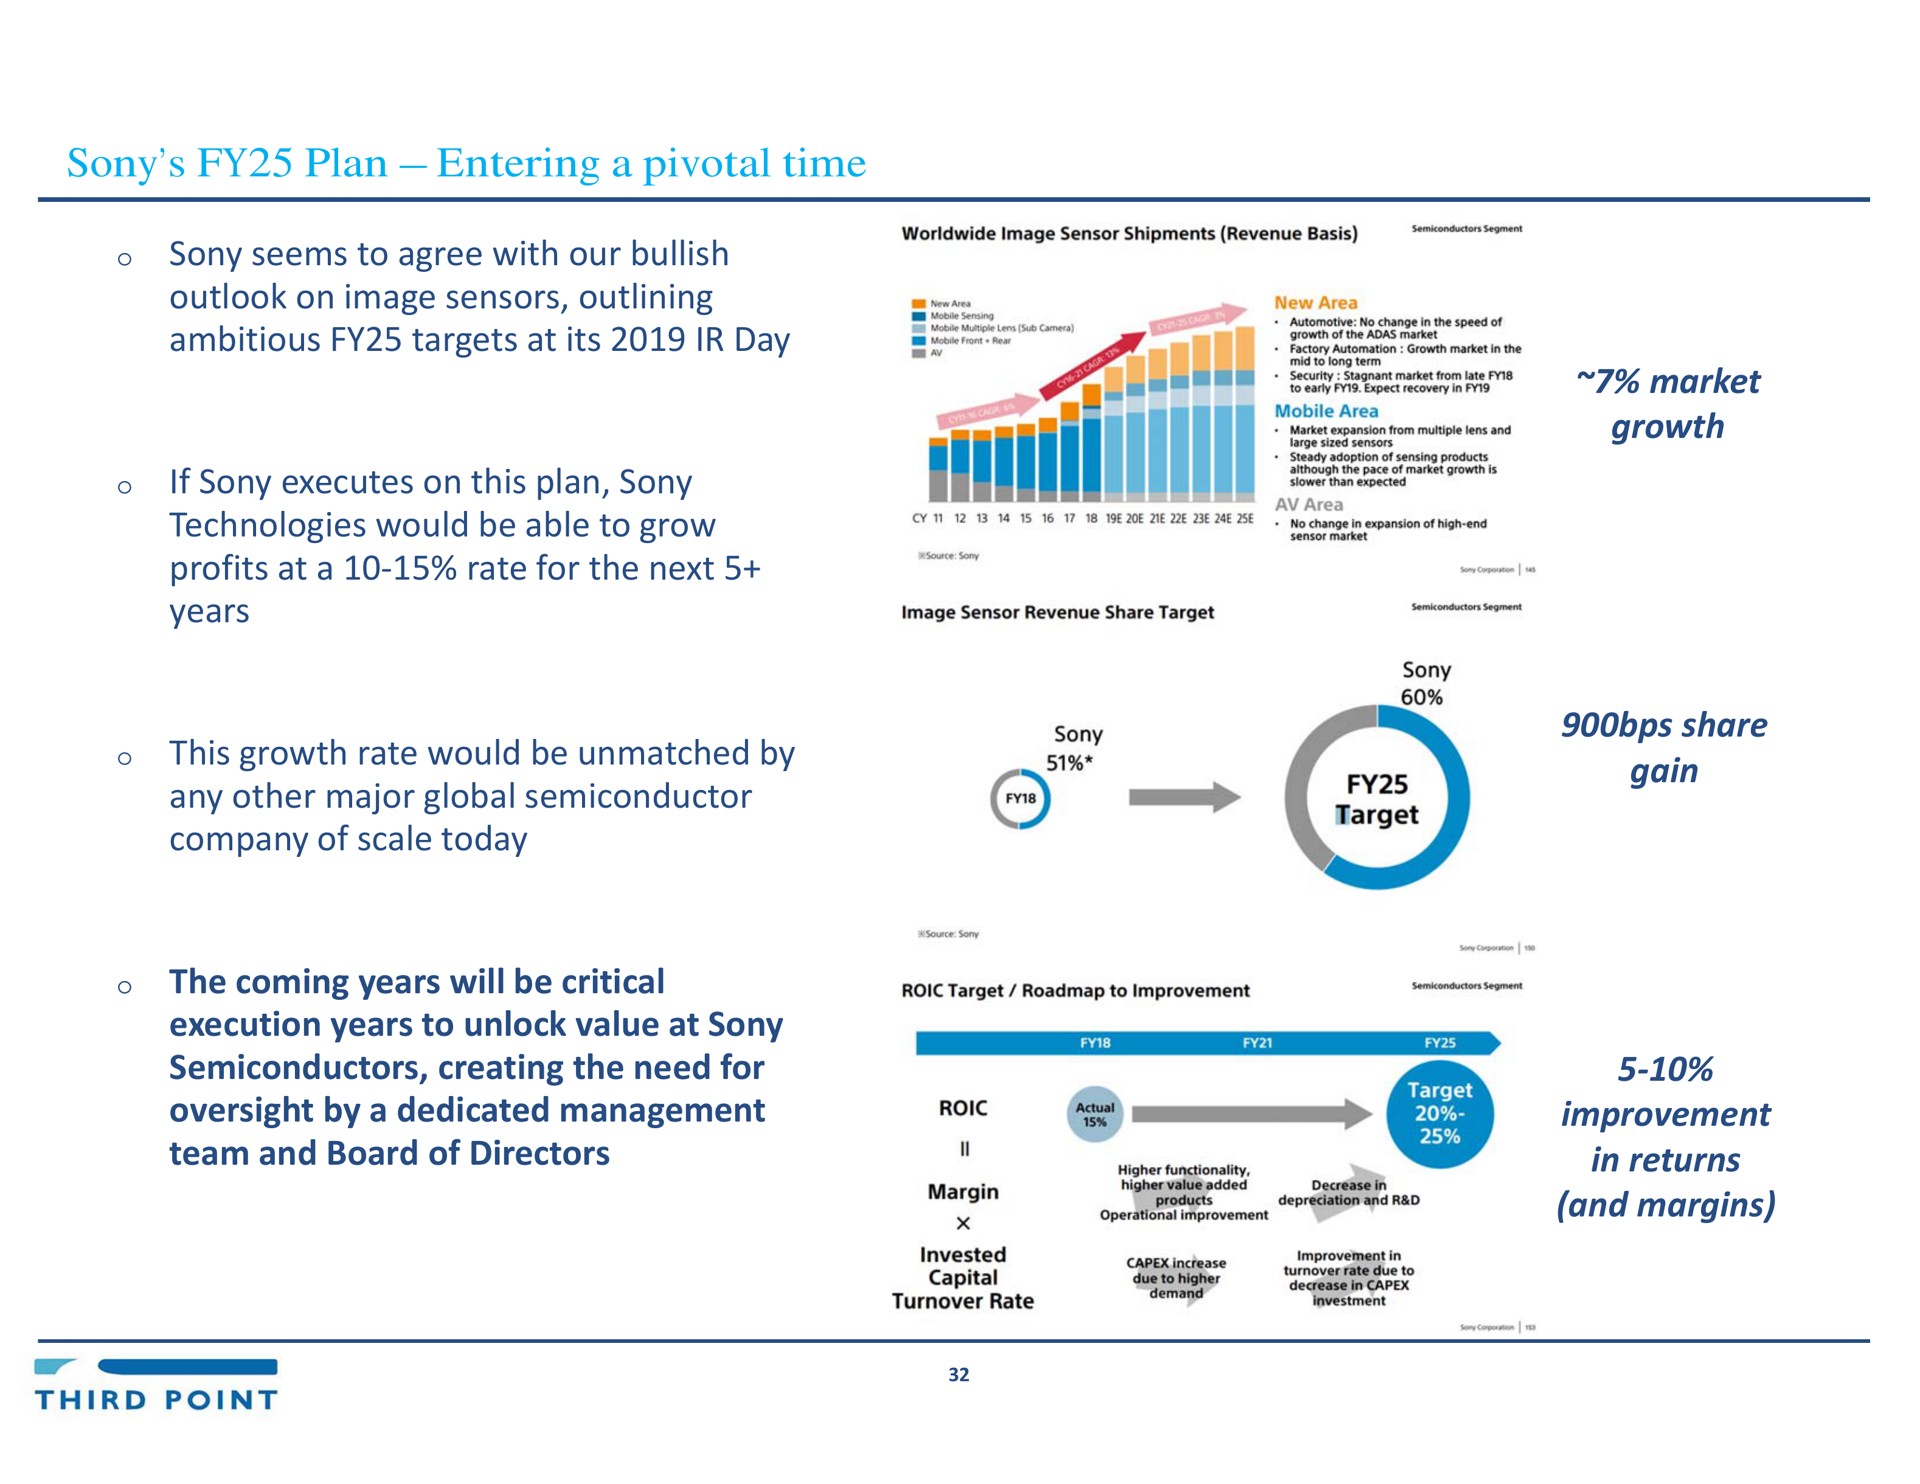 plan entering a pivotal time seems to agree with our bullish outlook on image sensors outlining ambitious targets at its day if executes on this plan technologies would be able to grow profits at a rate for the next years this growth rate would be unmatched by any other major global semiconductor company of scale today the coming years will be critical execution years to unlock value at semiconductors creating the need for oversight by a dedicated management team and board of directors market growth share gain improvement in returns and margins | Third Point Management